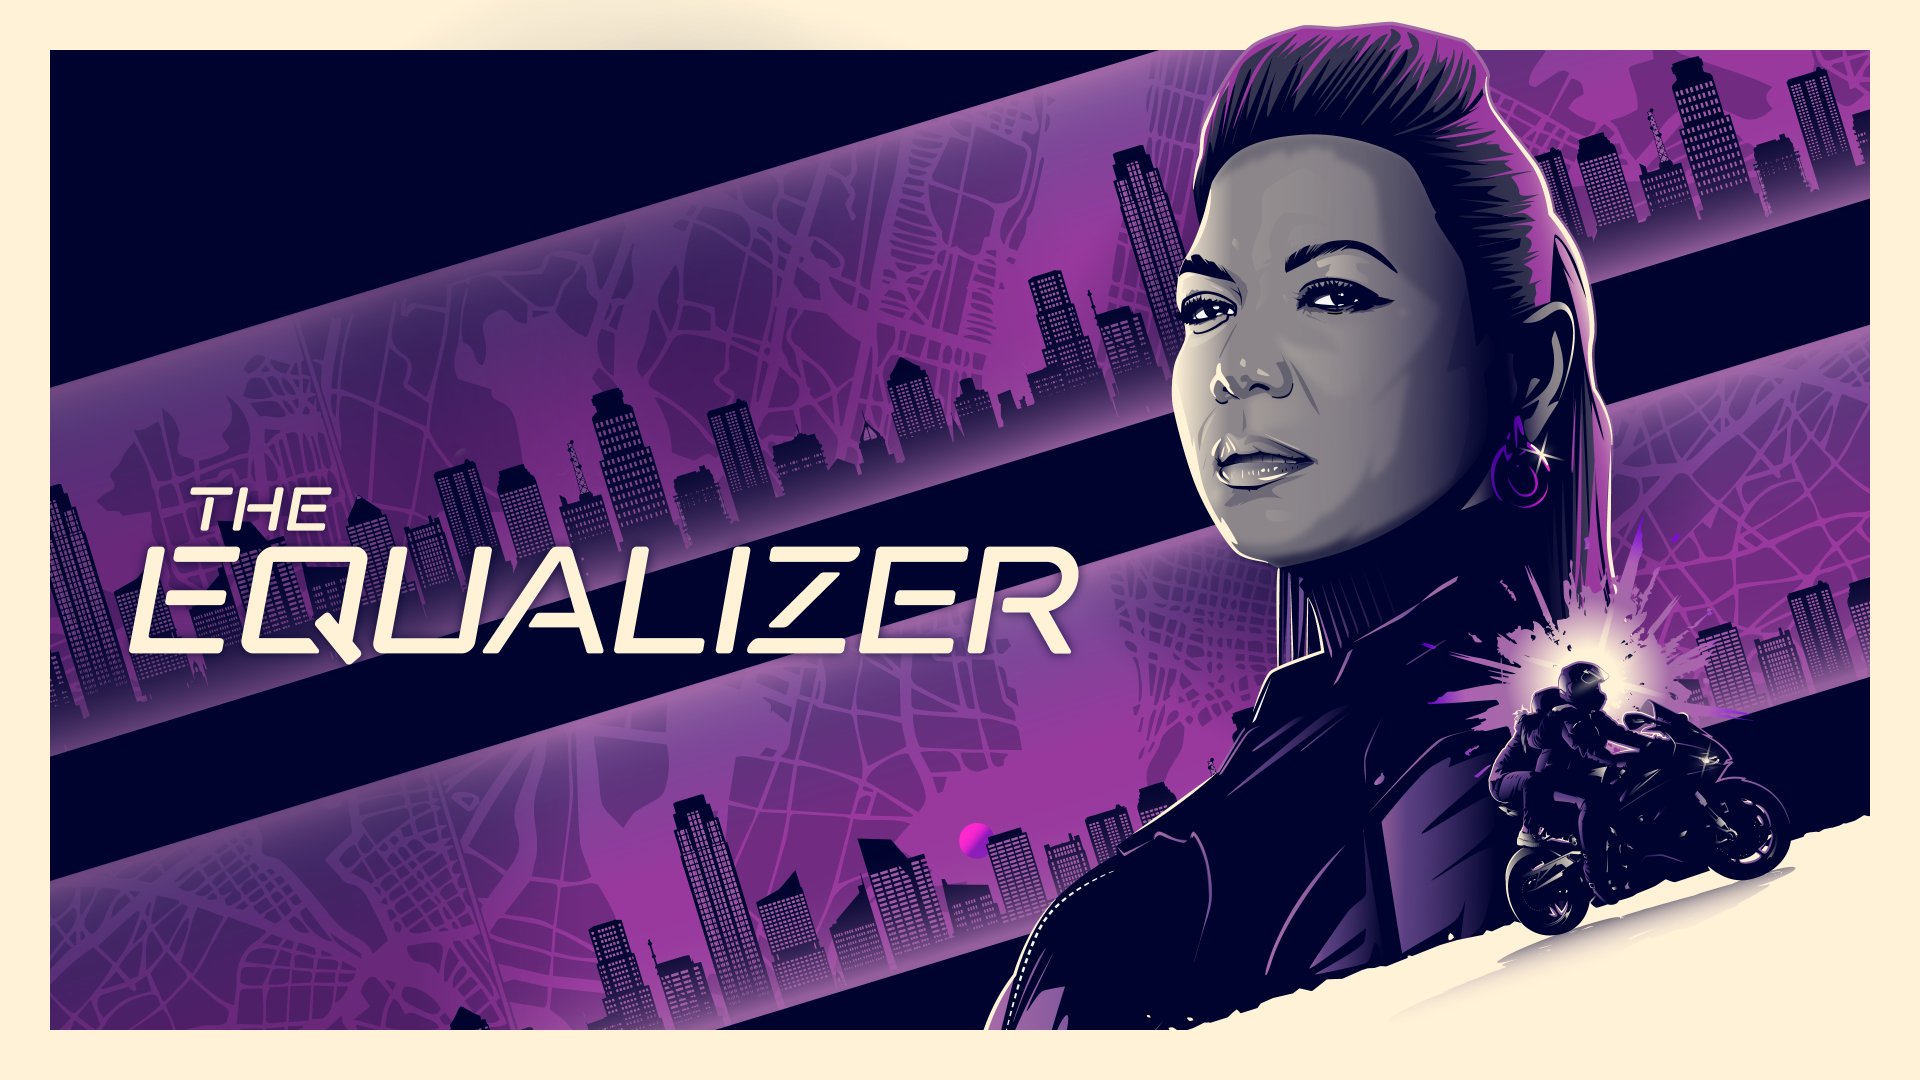 Watch The Equalizer Online - Stream Full Episodes